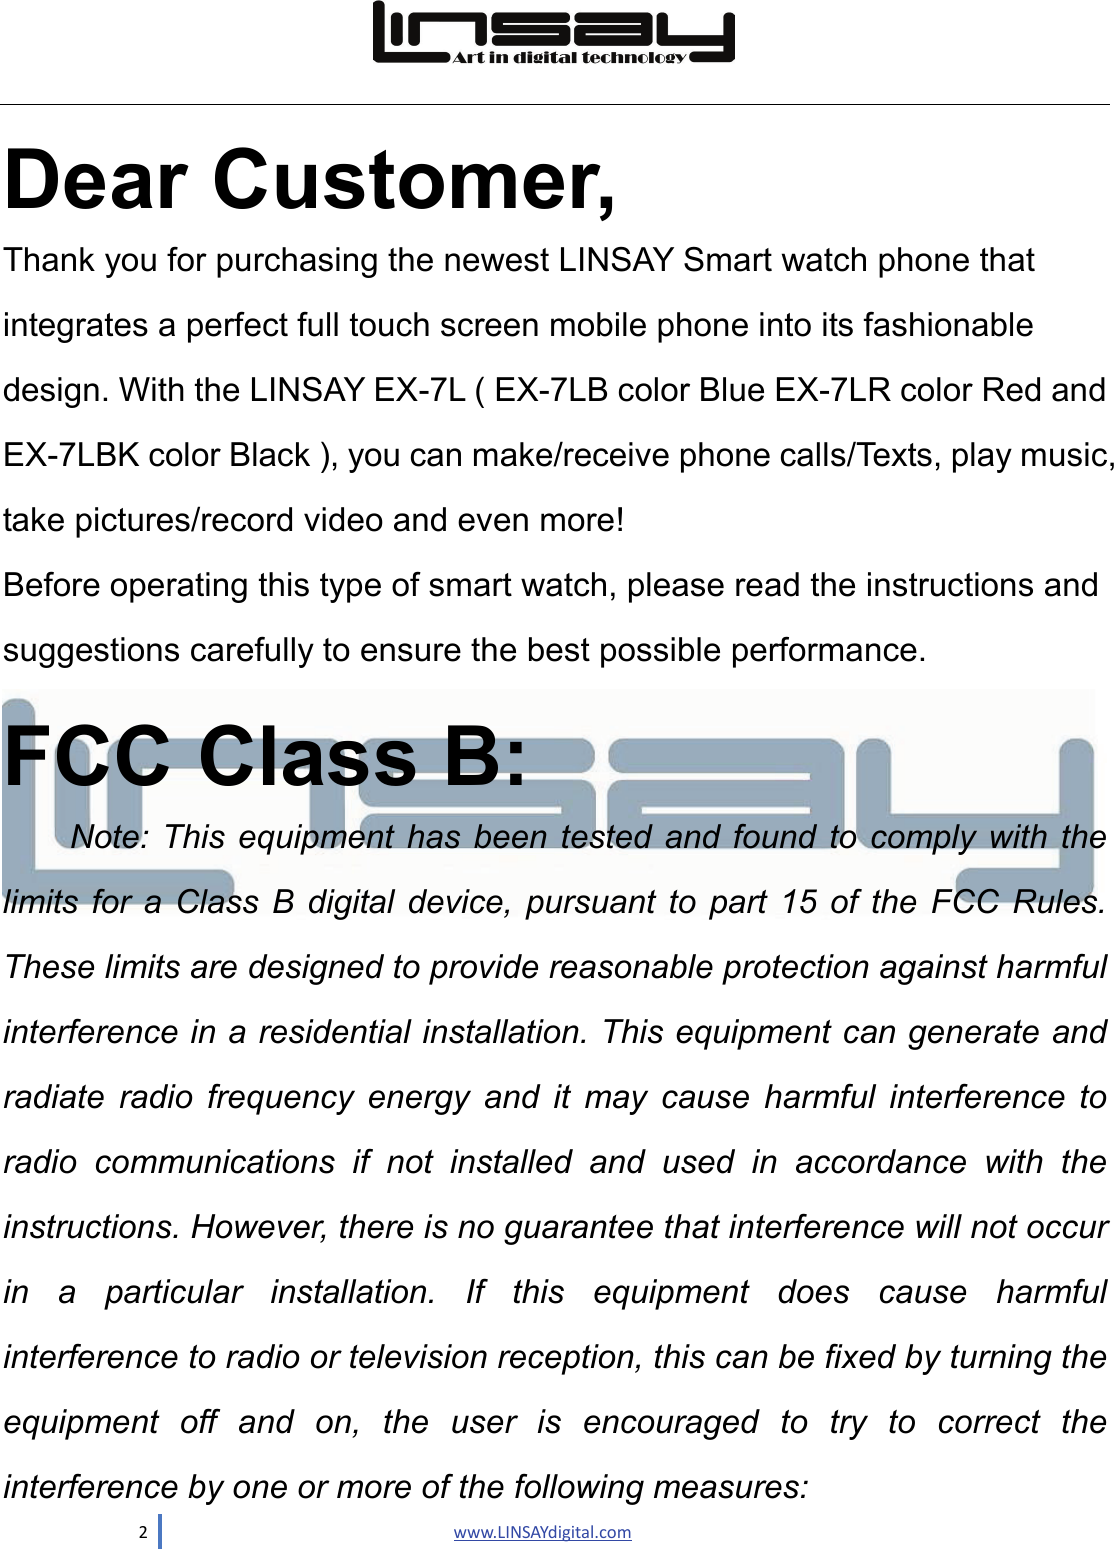  2                               www.LINSAYdigital.com   Dear Customer,  Thank you for purchasing the newest LINSAY Smart watch phone that integrates a perfect full touch screen mobile phone into its fashionable design. With the LINSAY EX-7L ( EX-7LB color Blue EX-7LR color Red and EX-7LBK color Black ), you can make/receive phone calls/Texts, play music, take pictures/record video and even more!   Before operating this type of smart watch, please read the instructions and suggestions carefully to ensure the best possible performance.  FCC Class B: Note: This equipment has been tested and found to comply with the limits for a Class B digital device, pursuant to part 15 of the FCC Rules. These limits are designed to provide reasonable protection against harmful interference in a residential installation. This equipment can generate and radiate radio frequency energy and  it  may cause harmful interference to radio communications if not installed and used in accordance with the instructions. However, there is no guarantee that interference will not occur in a particular installation. If this equipment does cause harmful interference to radio or television reception, this can be fixed by turning the equipment off and on, the user is encouraged to try to correct the interference by one or more of the following measures: 